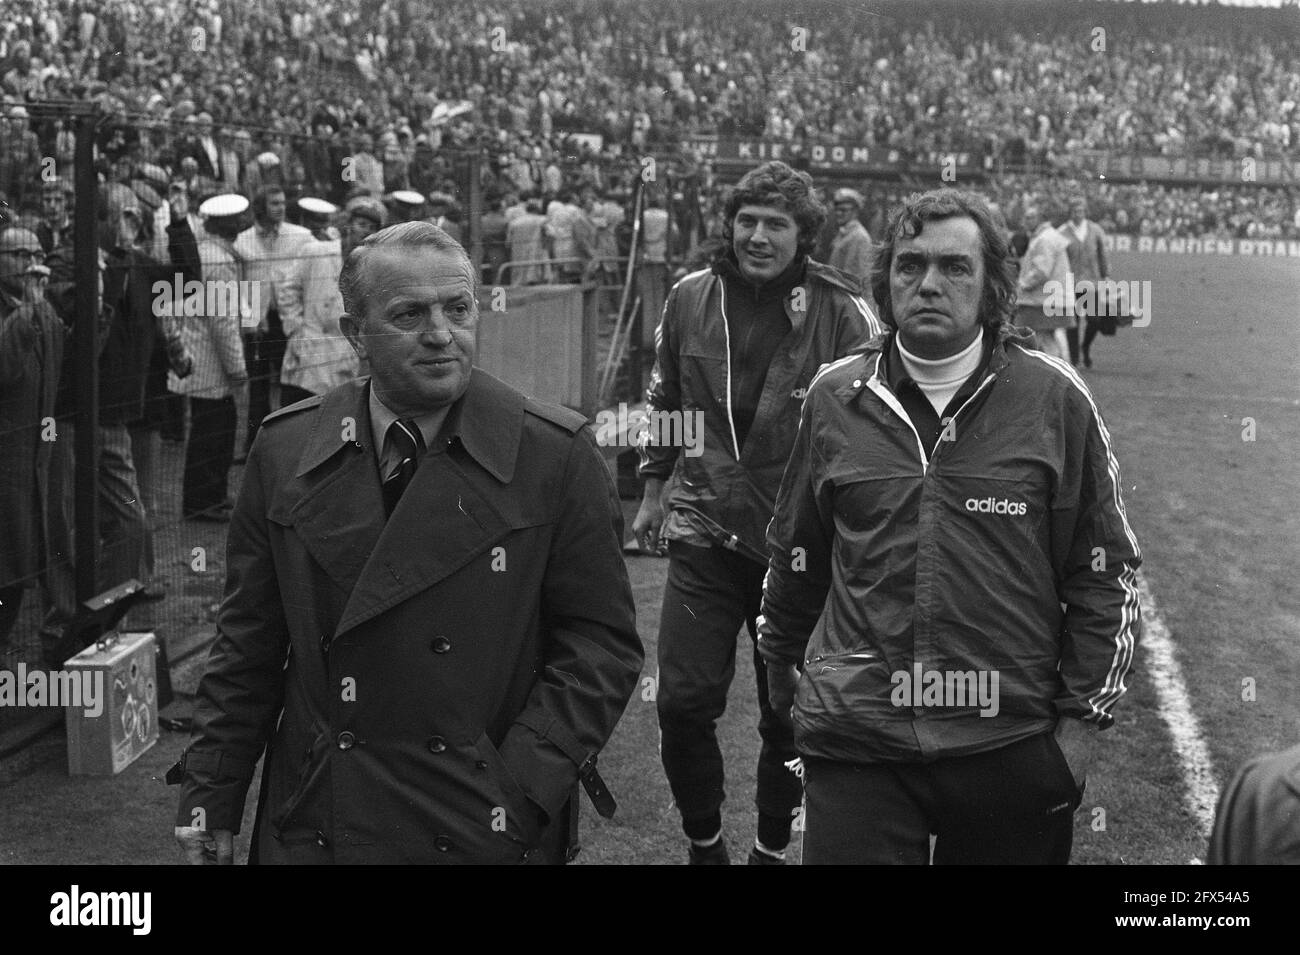 Feyenoord against Ajax 2-0, trainer Kovacs (left) and Happel, September 17, 1972, sports, trainers, soccer, The Netherlands, 20th century press agency photo, news to remember, documentary, historic photography 1945-1990, visual stories, human history of the Twentieth Century, capturing moments in time Stock Photo